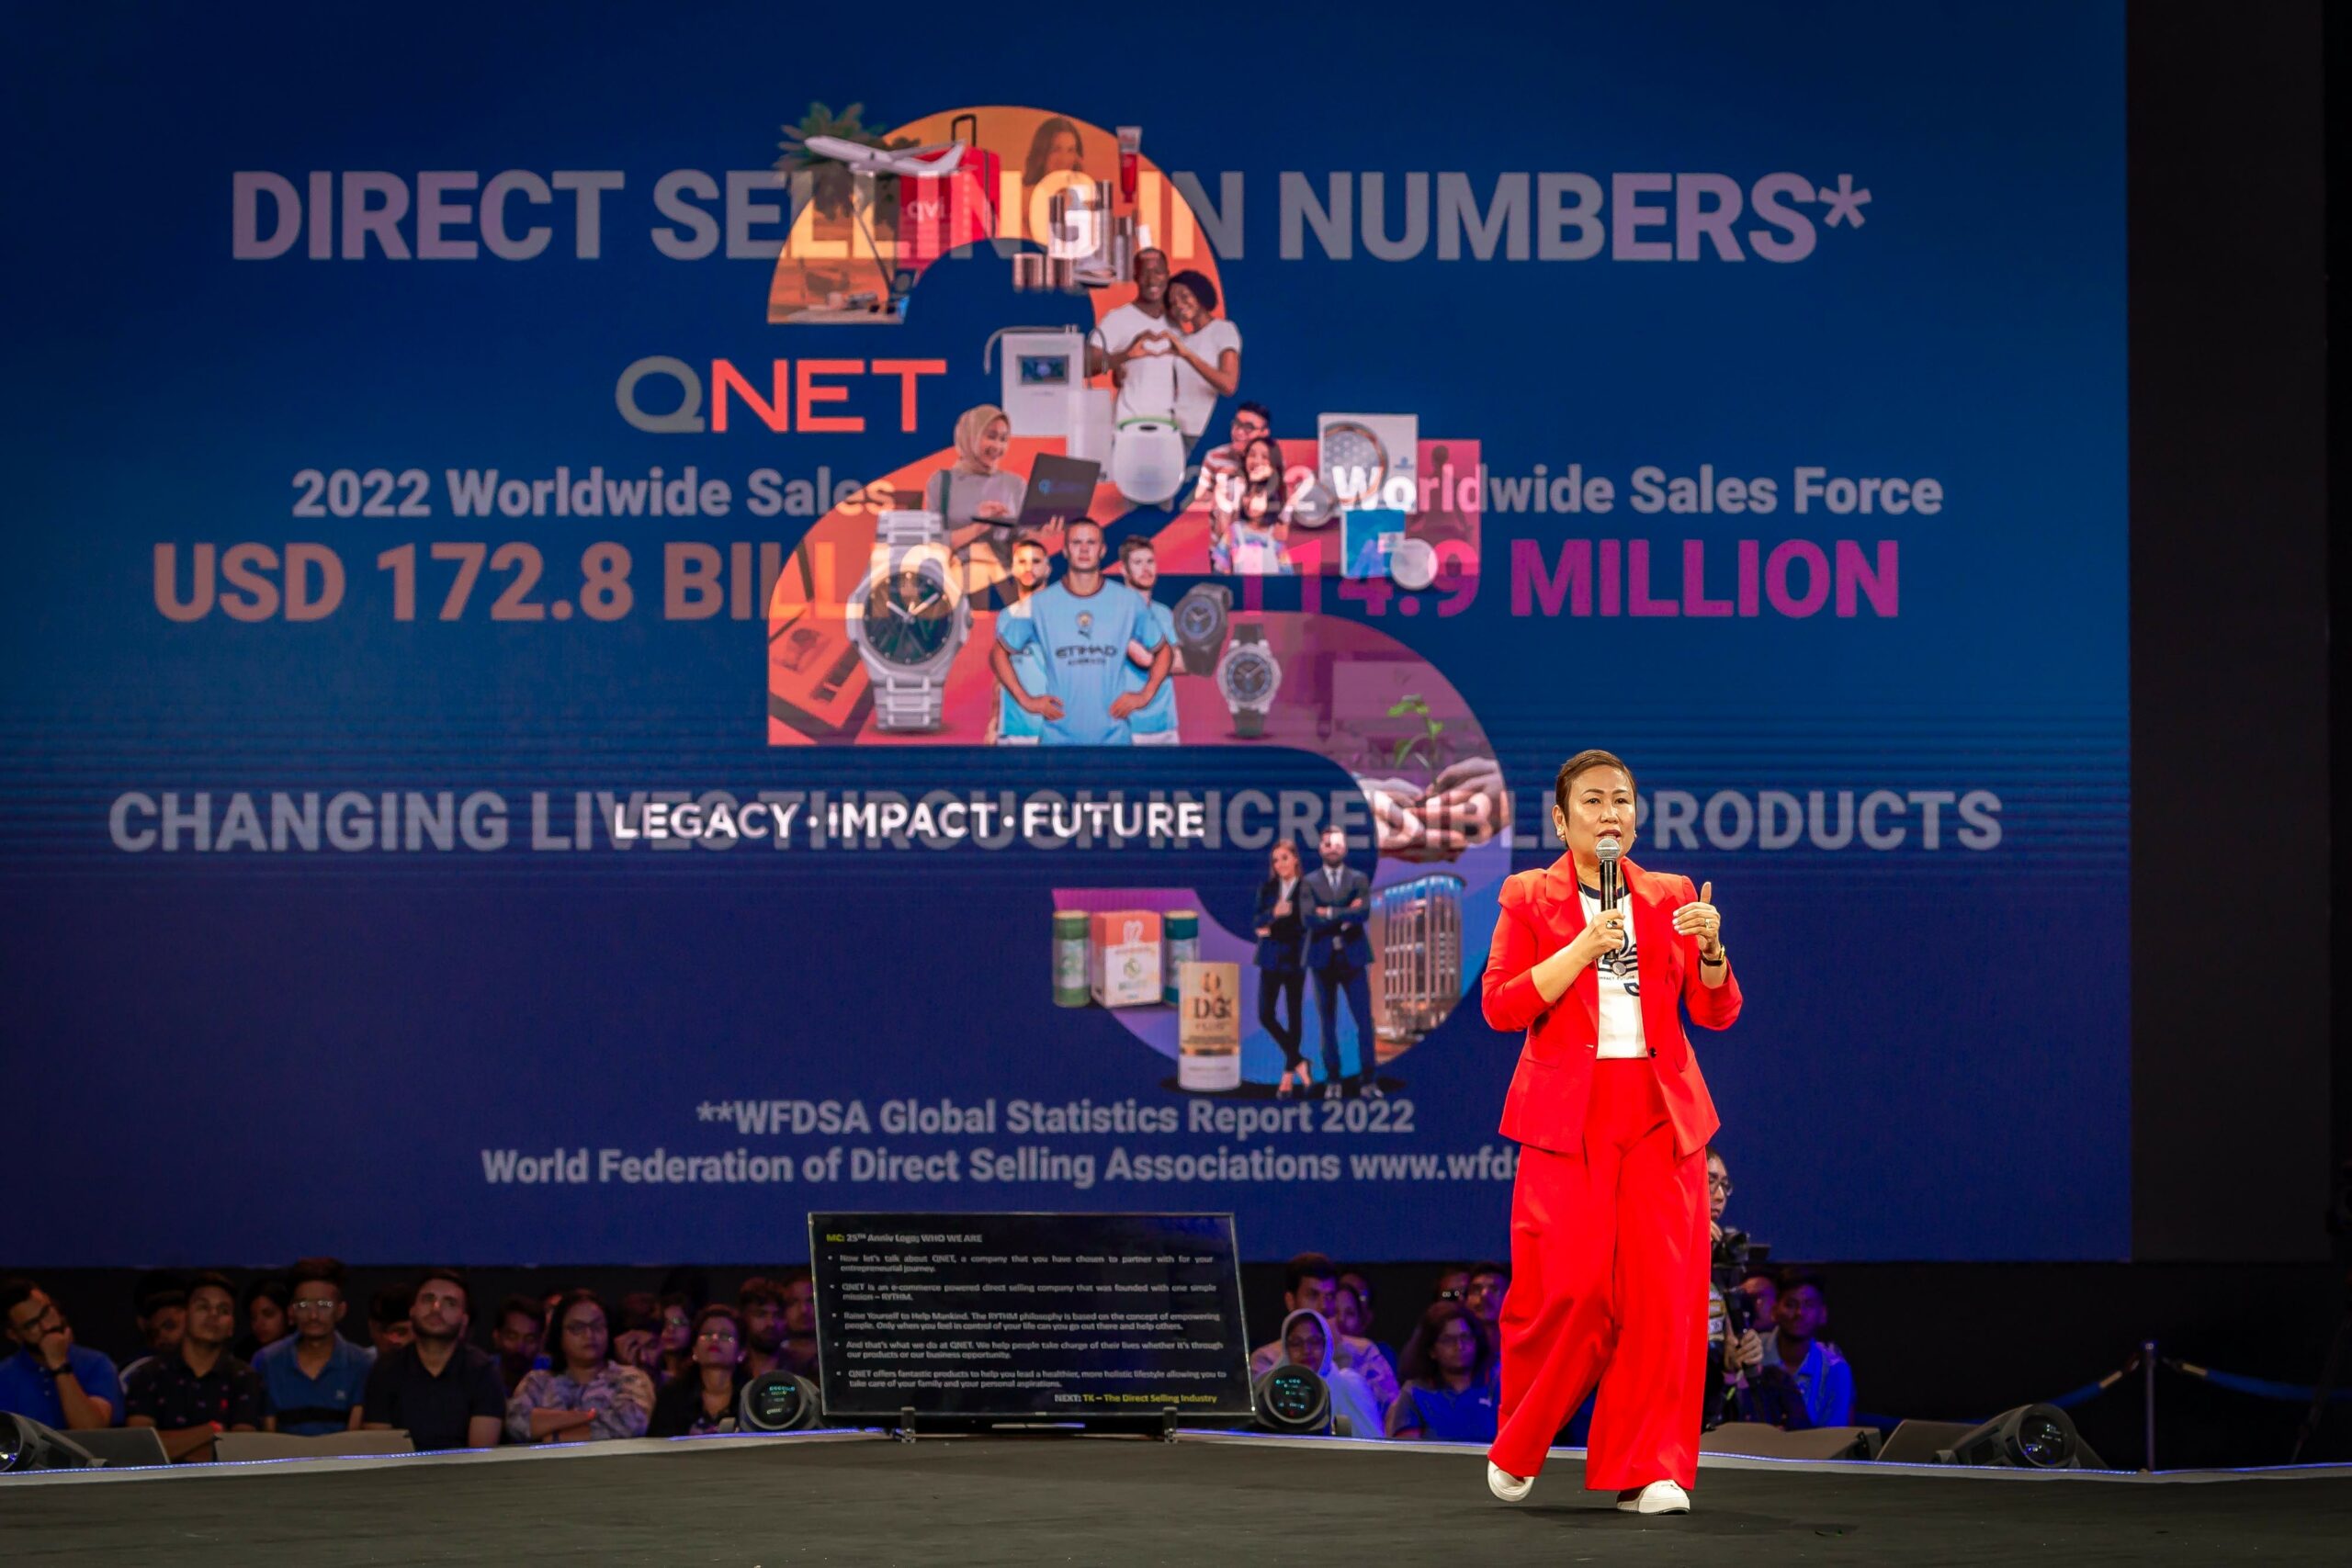 QNET Launches Two Products During Its 25th Anniversary